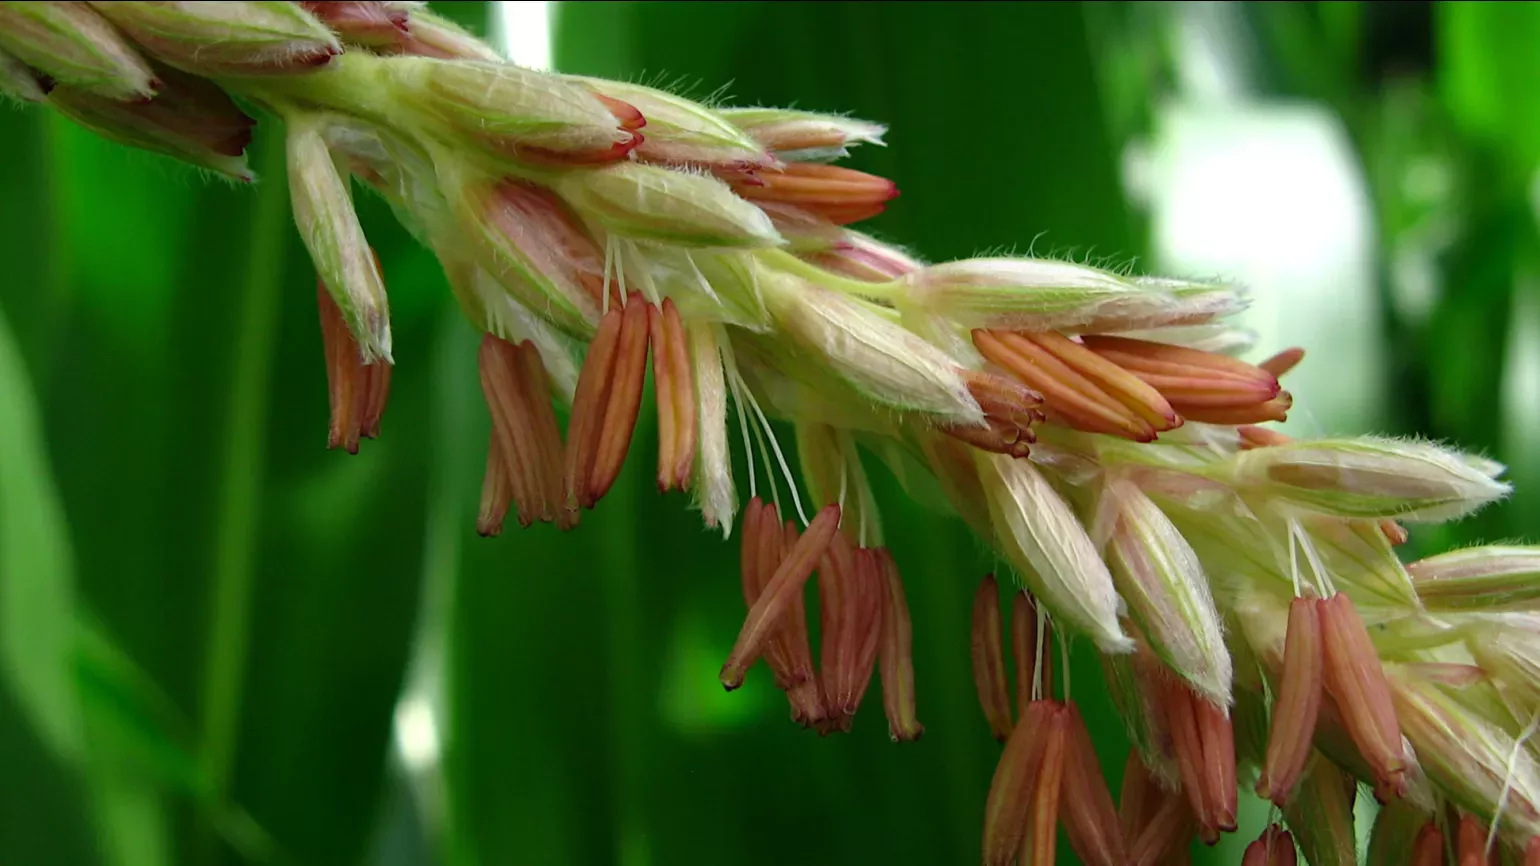 A close up on the grass like flowers of maize